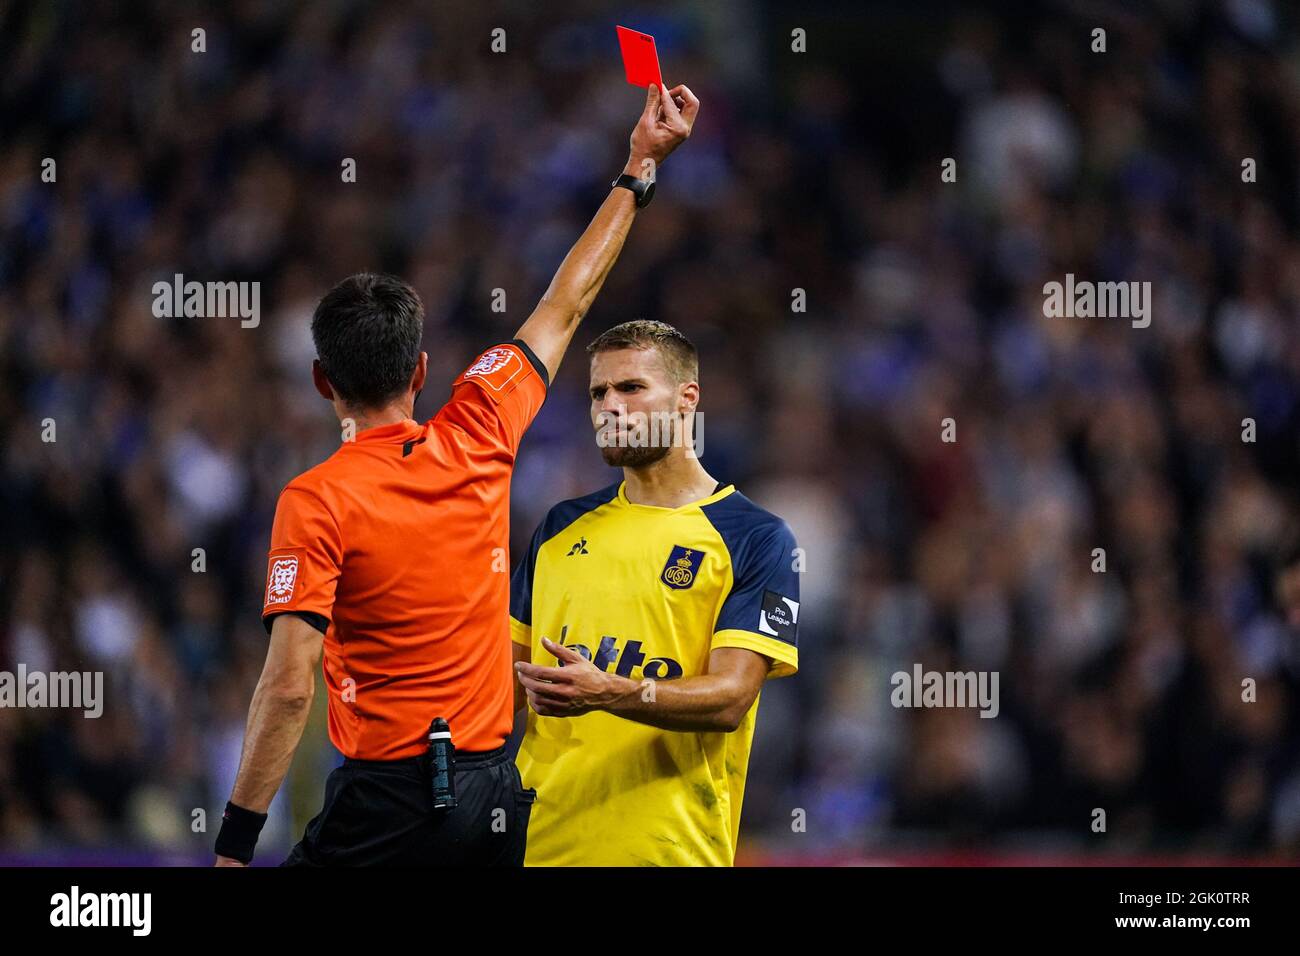 GENK, BELGIUM - SEPTEMBER 12: Referee Erik Lambrechts shows a direct red  card to Jonas Bager of Union SG after checking the VAR during the Jupiler  Pro League match between KRC Genk